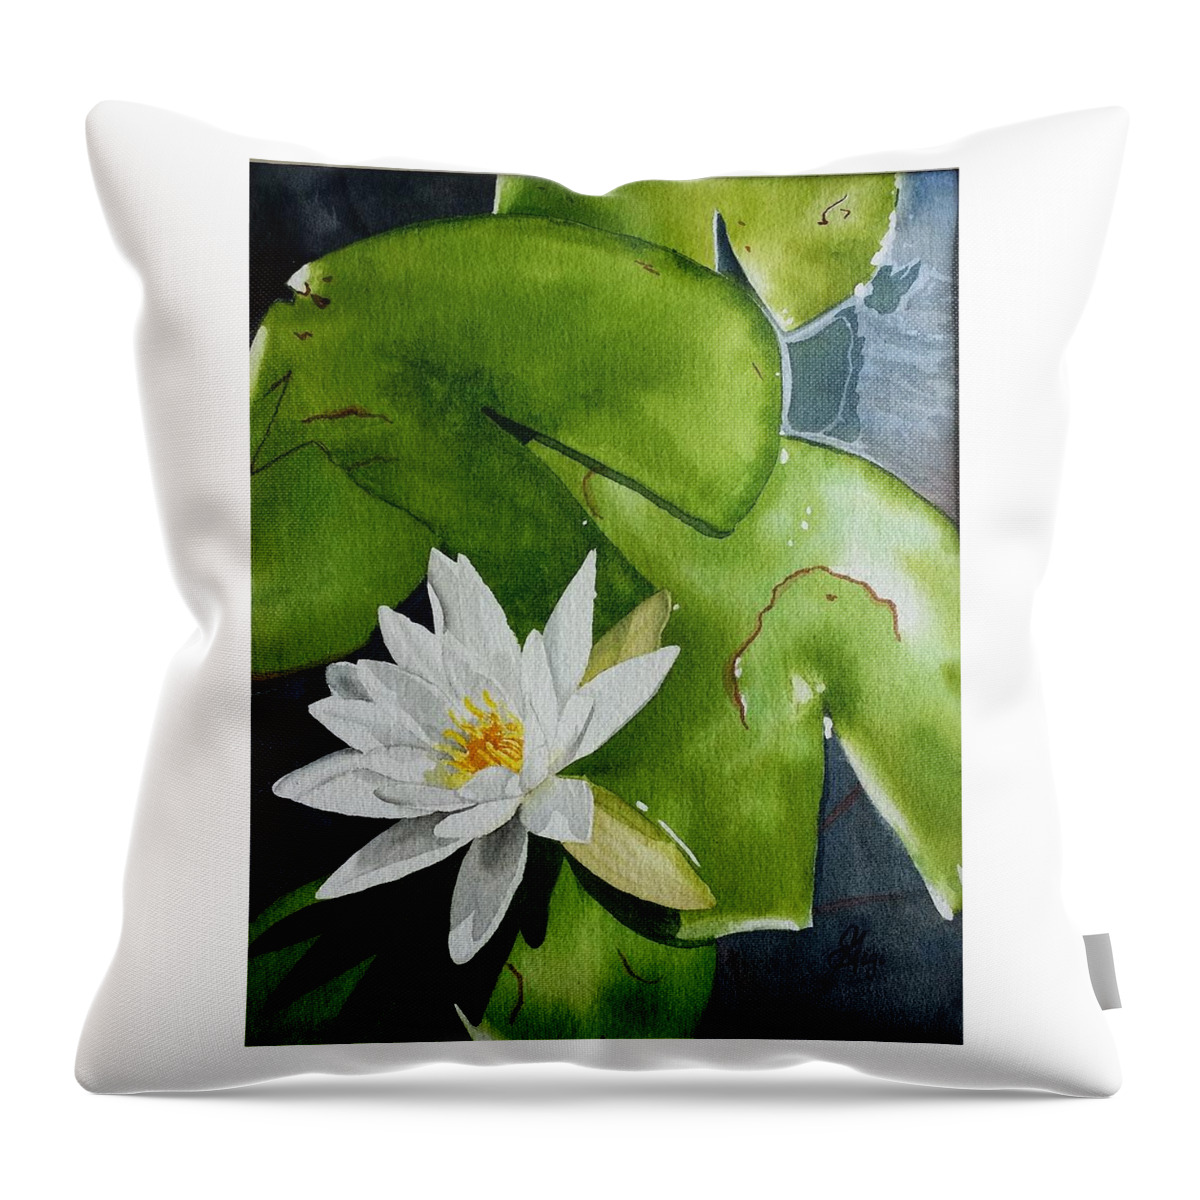 Water Throw Pillow featuring the painting Water Lilly by Gigi Dequanne